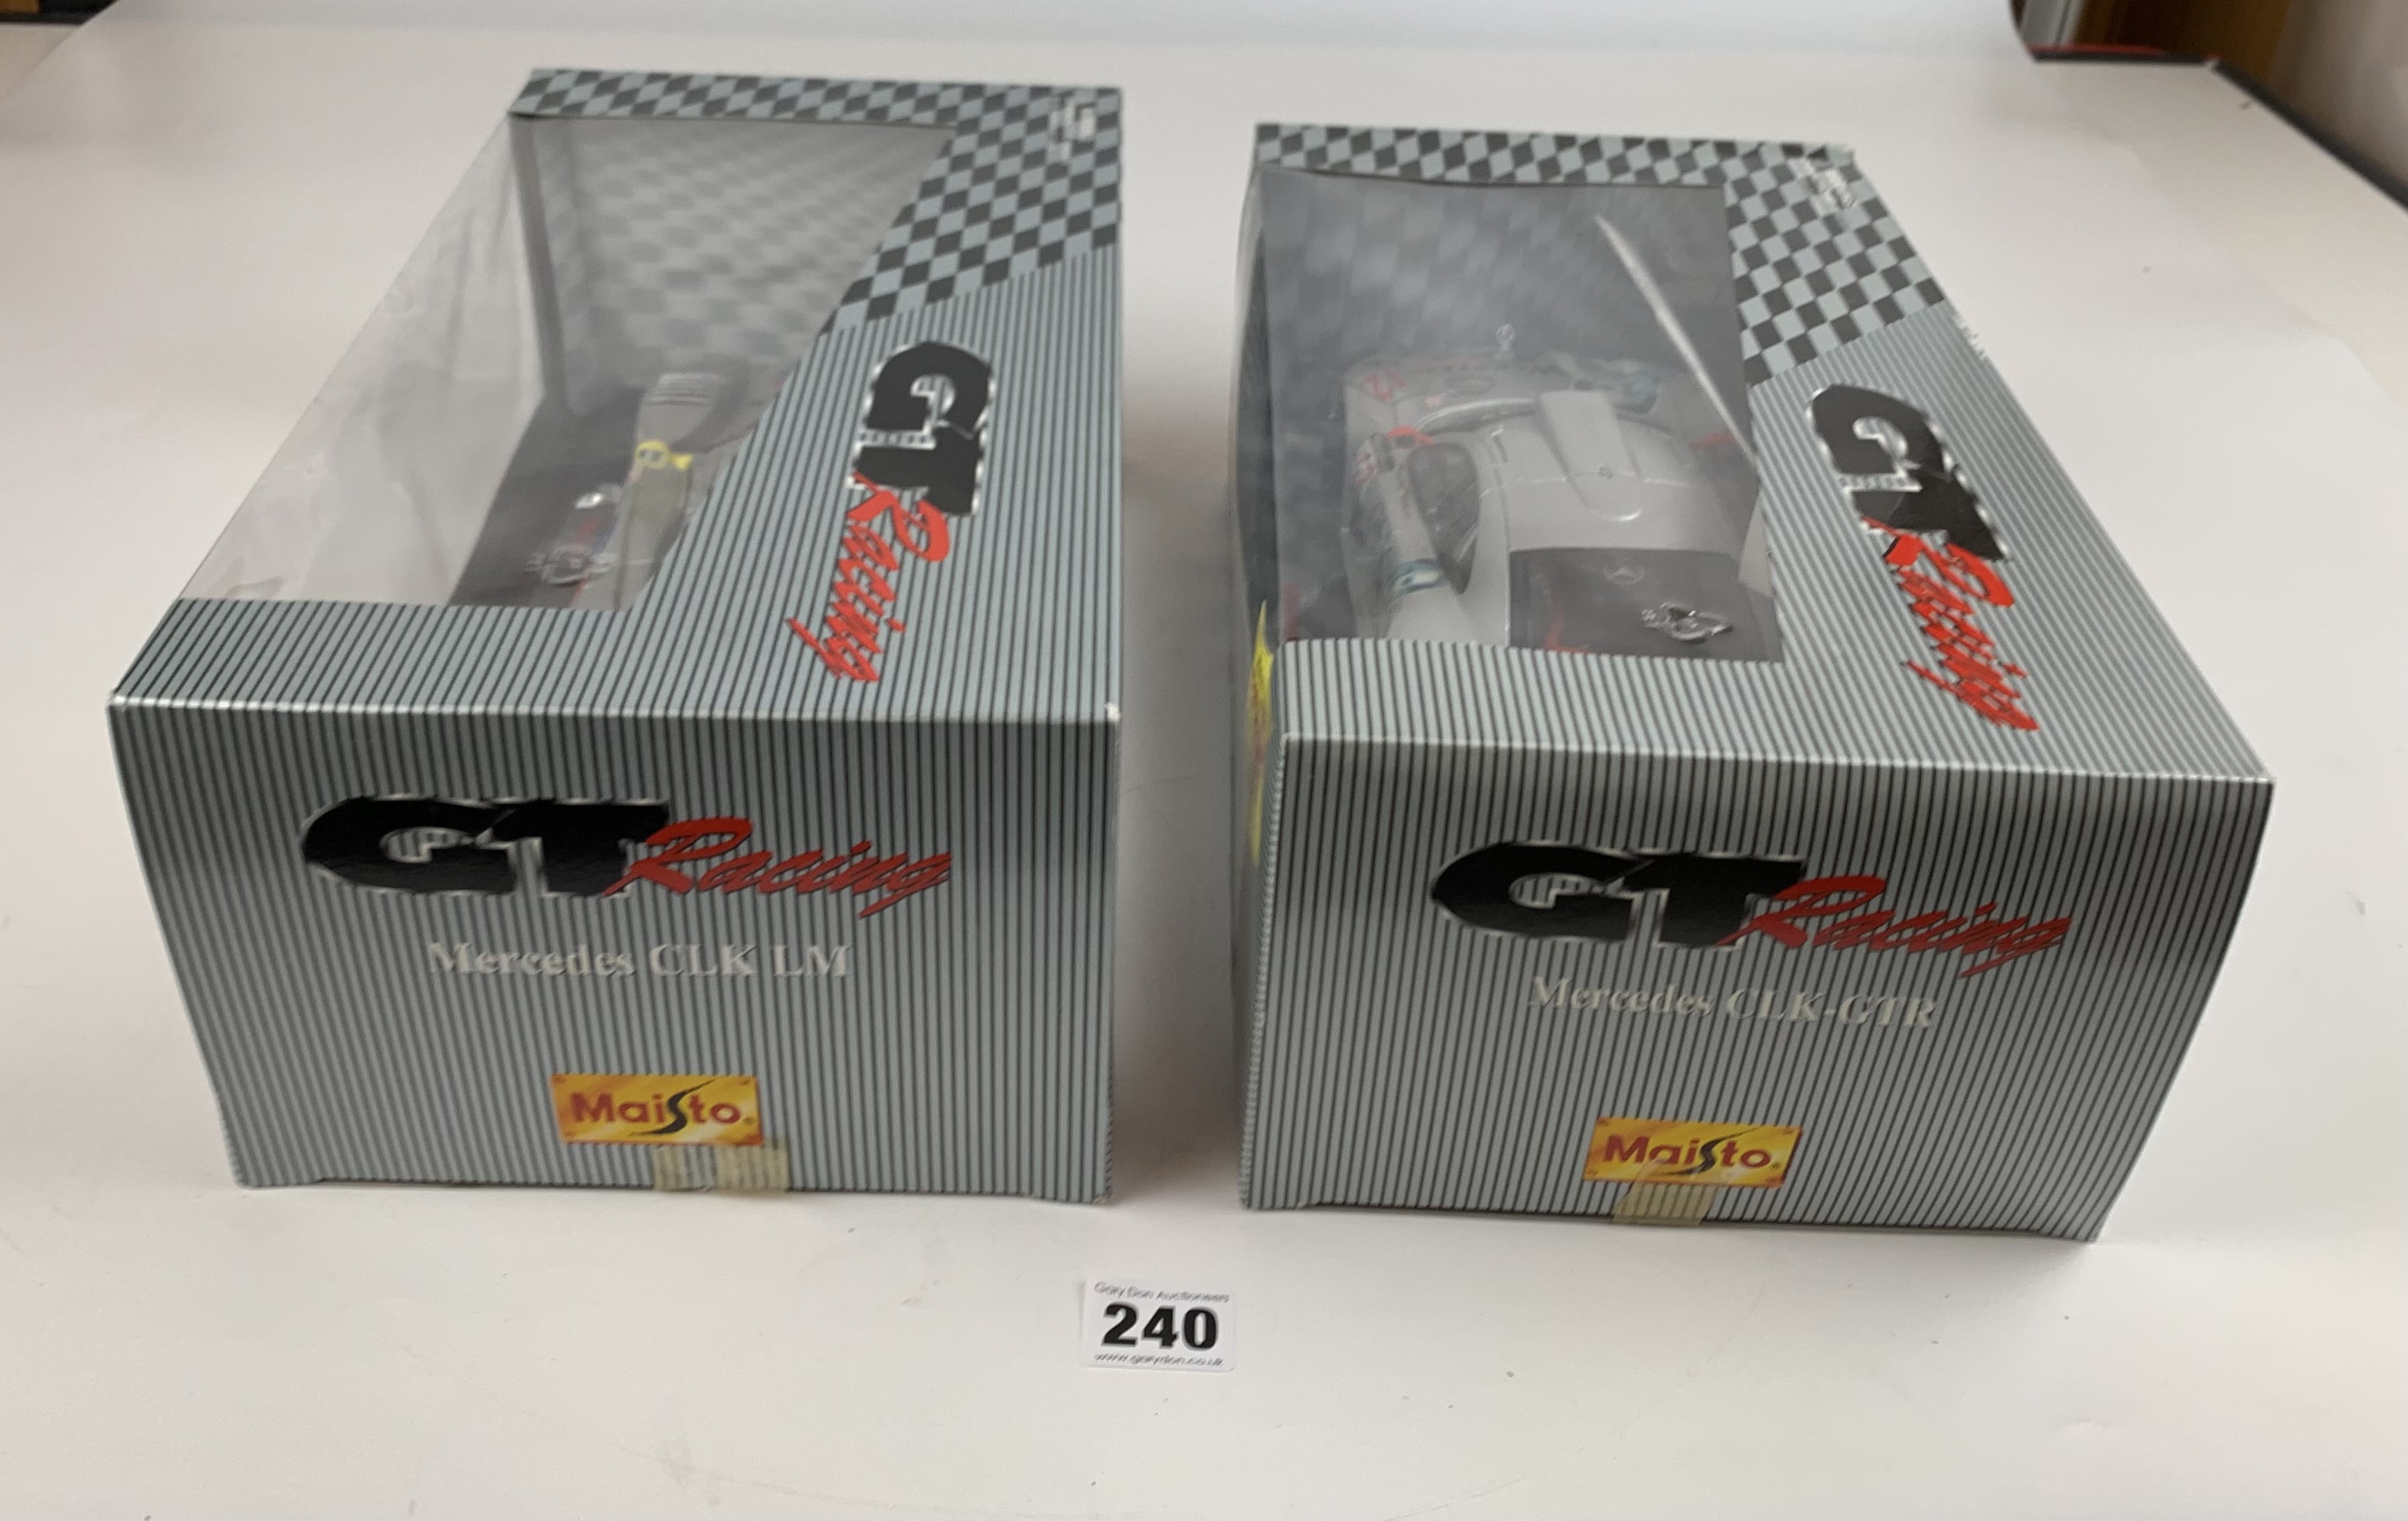 2 boxed Maisto 1:18 die cast racing cars – Mercedes CLK LM and Mercedes CLK-GTR - Image 5 of 7